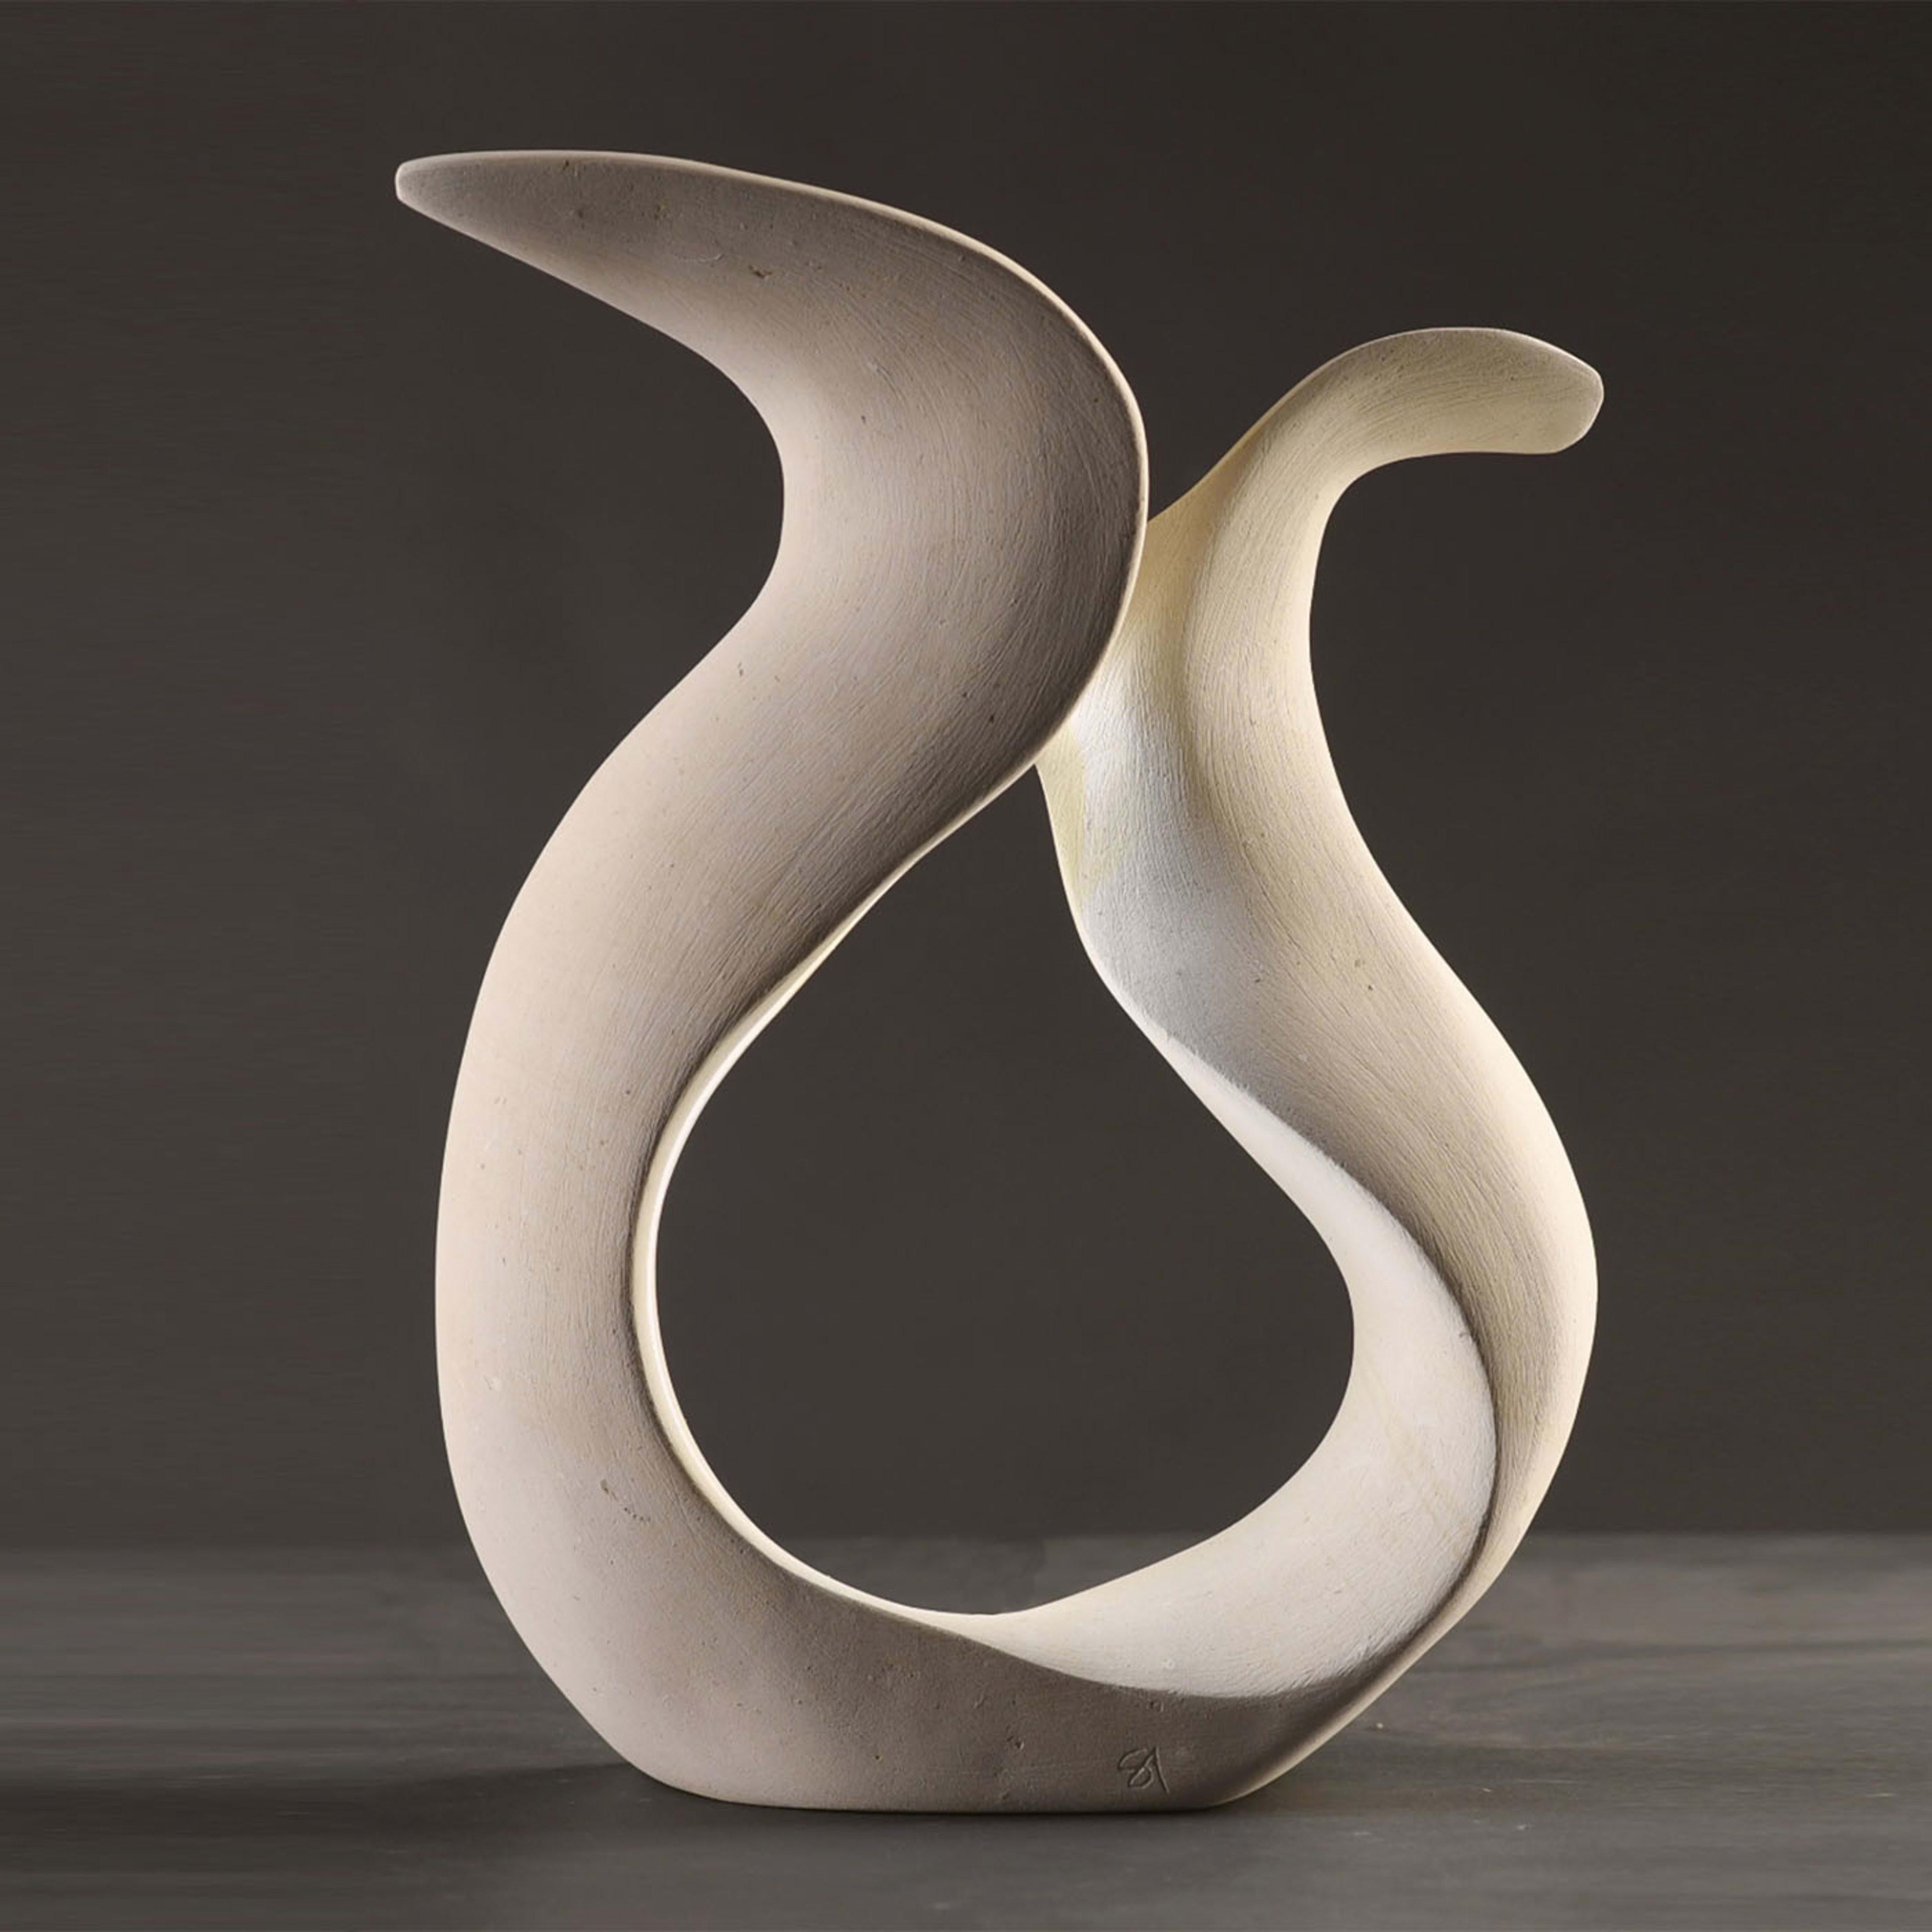 Sensuality and emotion actualized in sinuous curves seemingly shaped by the wind define this superb sculpture of unmistakable contemporary inspiration. Incorporating a warm white LED strip - color customizable upon request - the piece gets minutely